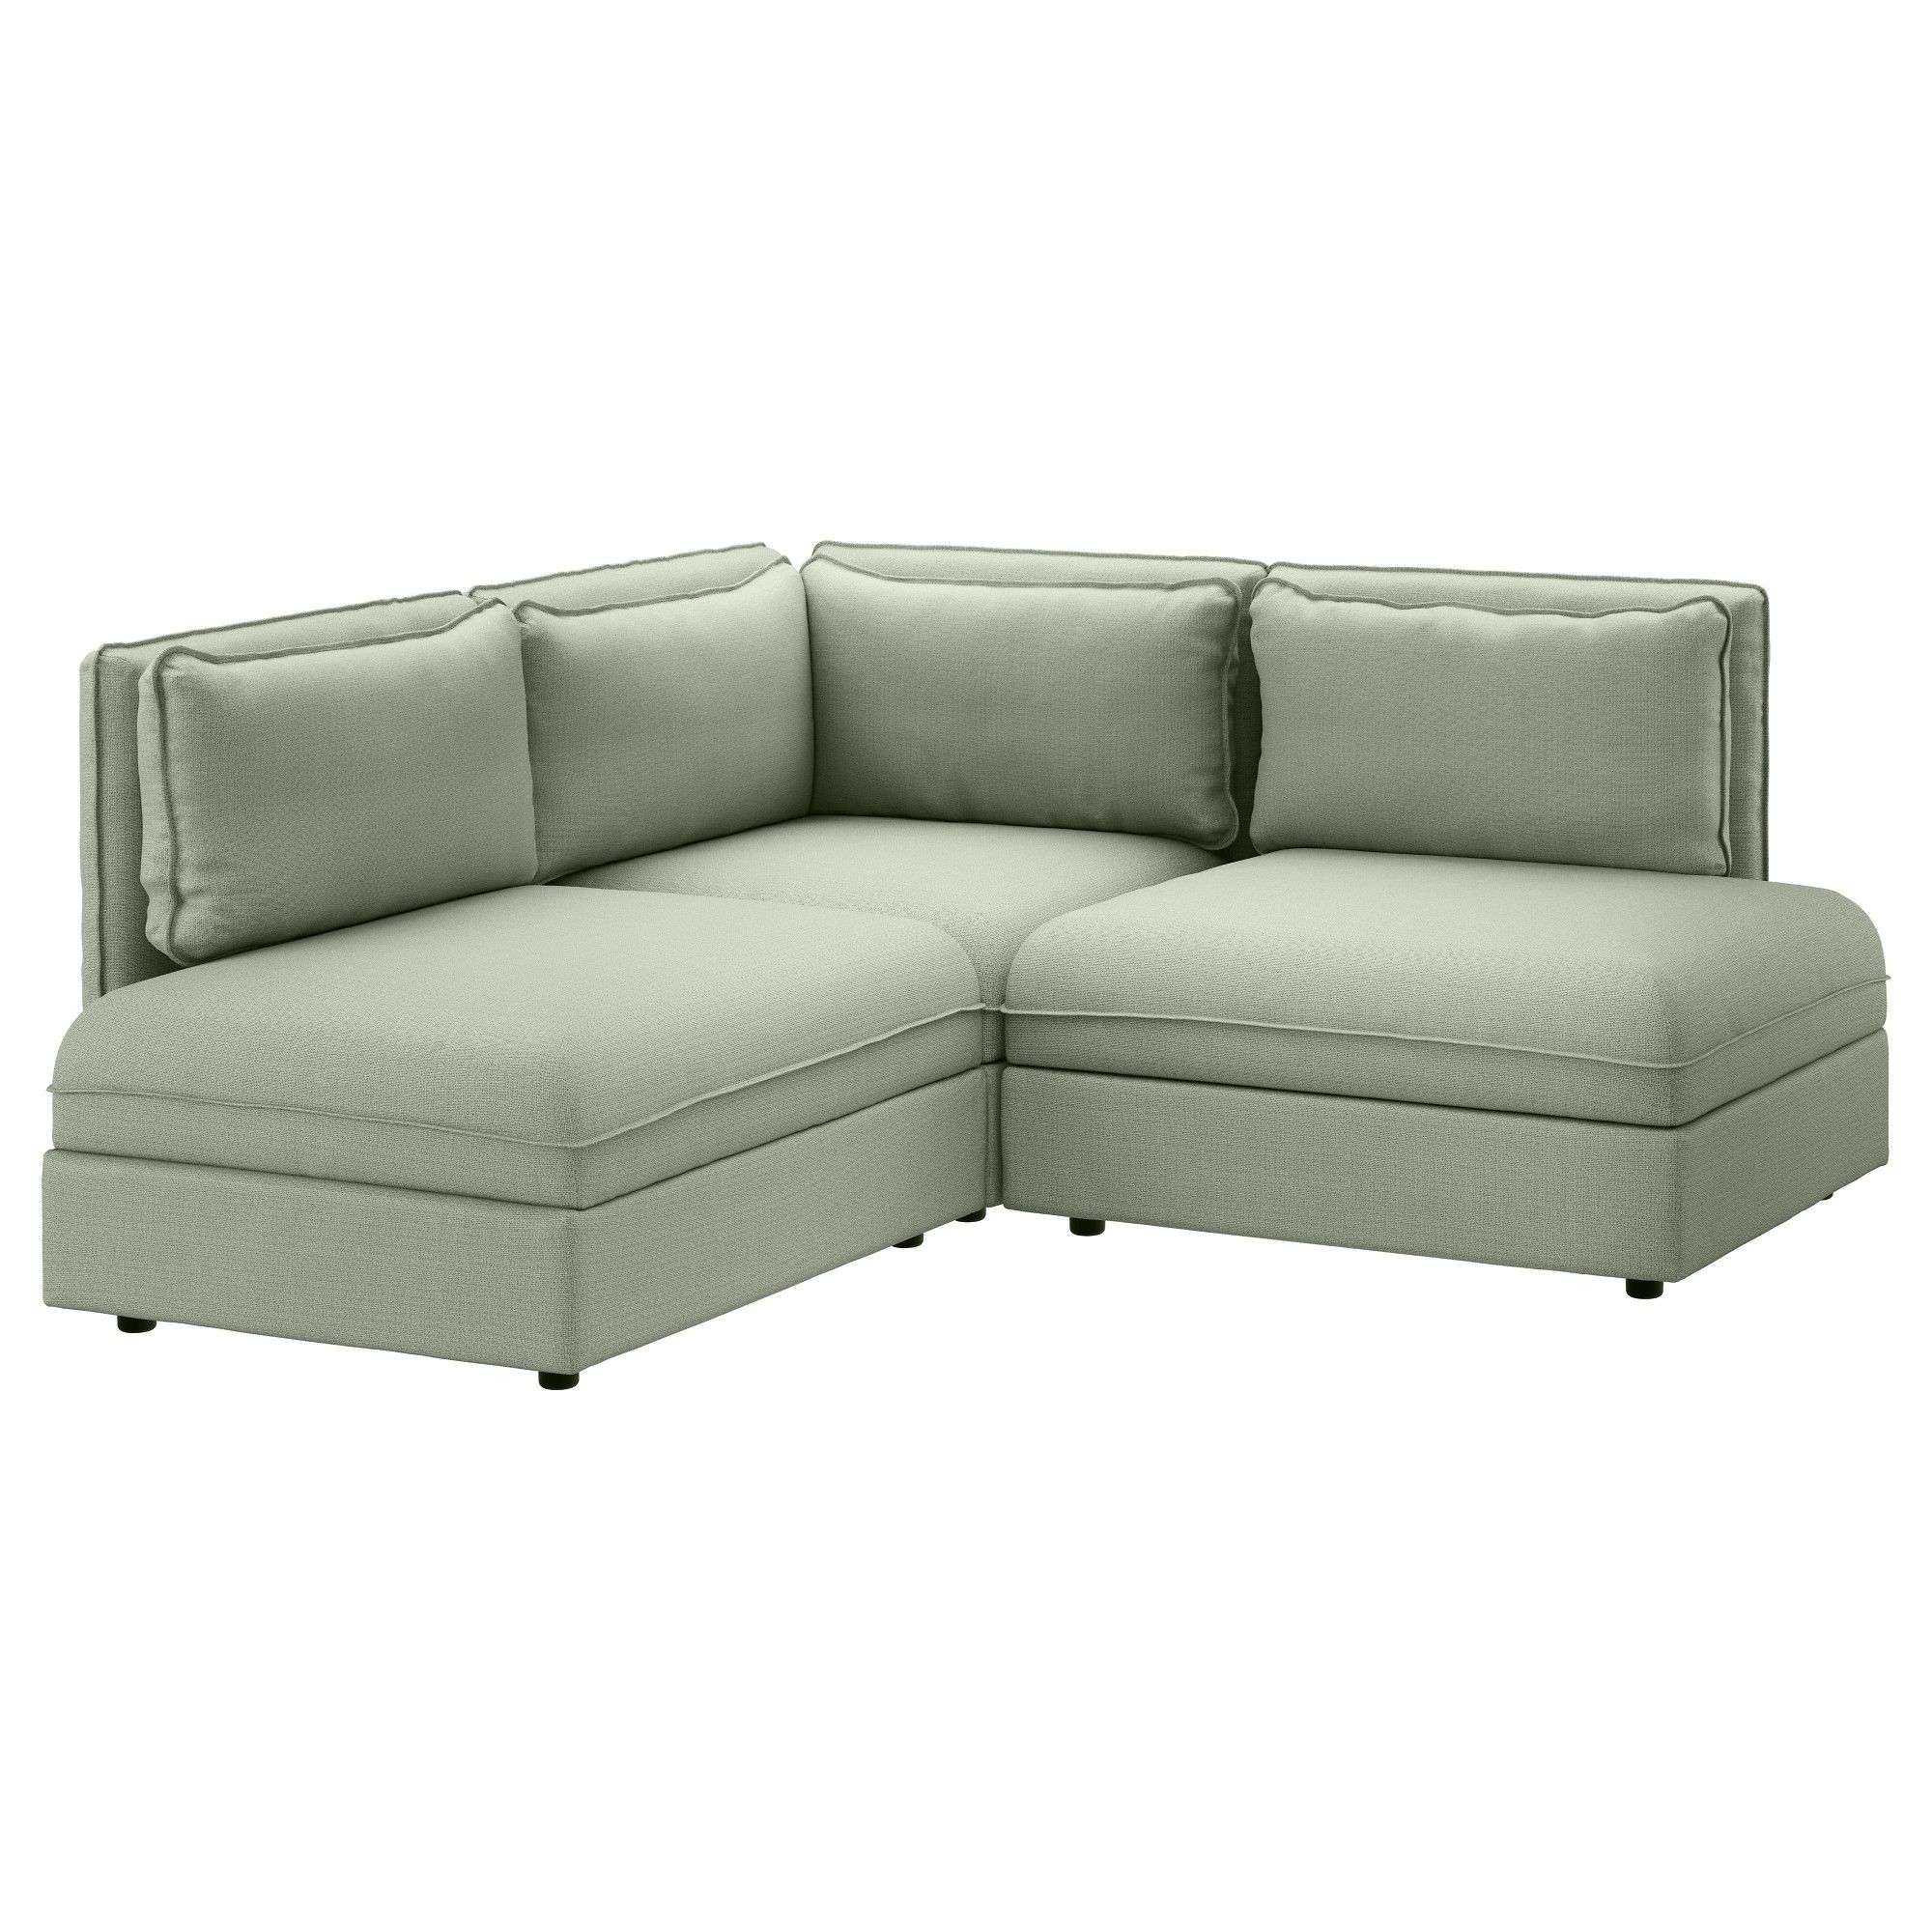 Luxury Sectional Sofas Ikea 94 Sofas And Couches Ideas With With Regard To Sectional Sofas At Ikea (View 6 of 10)